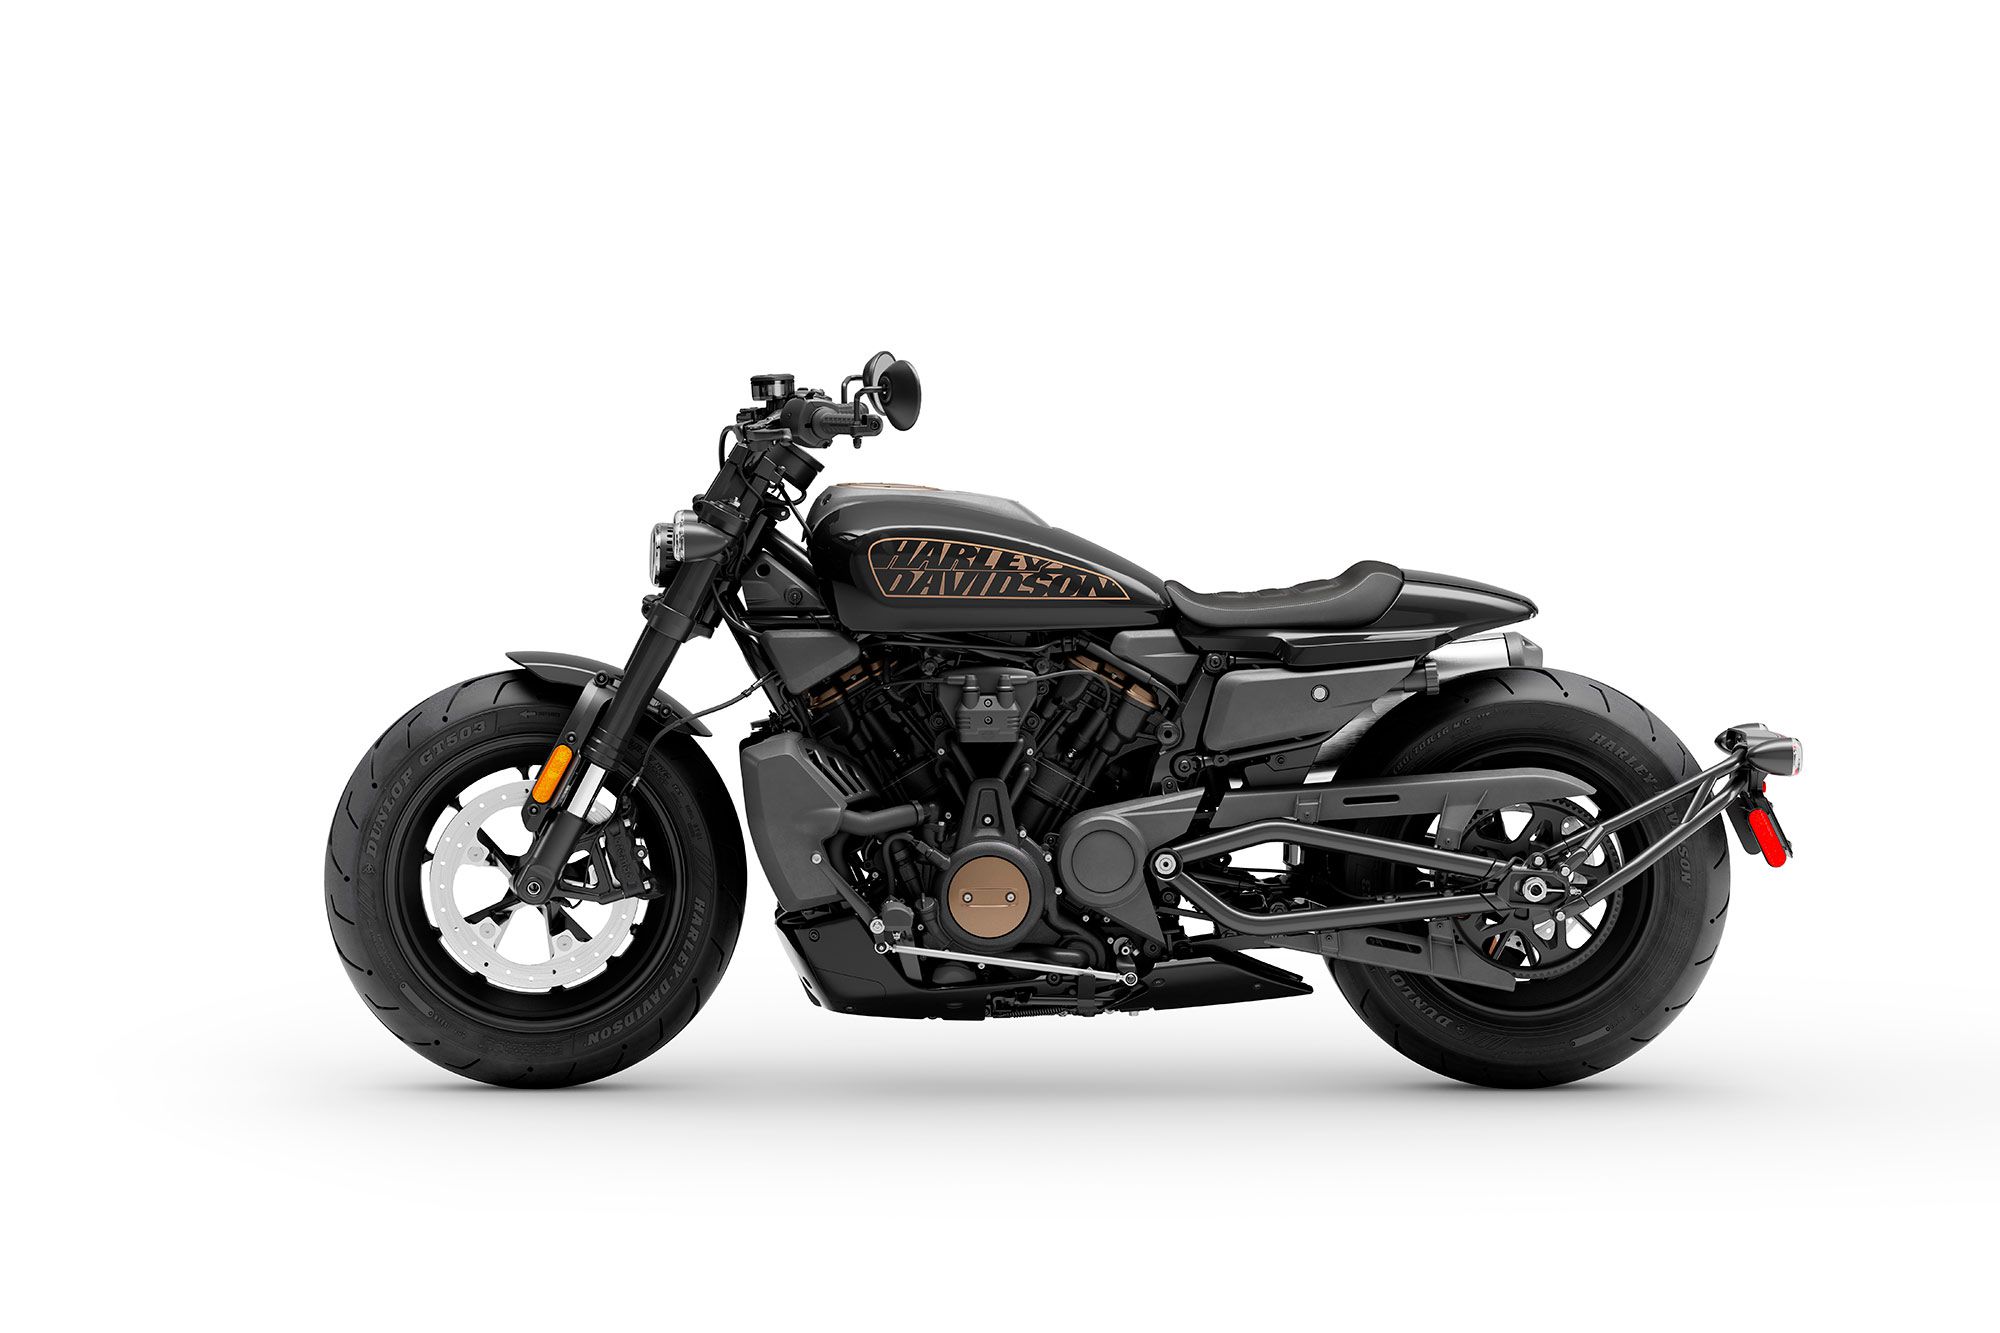 The Sportster S will be available starting fall 2021.